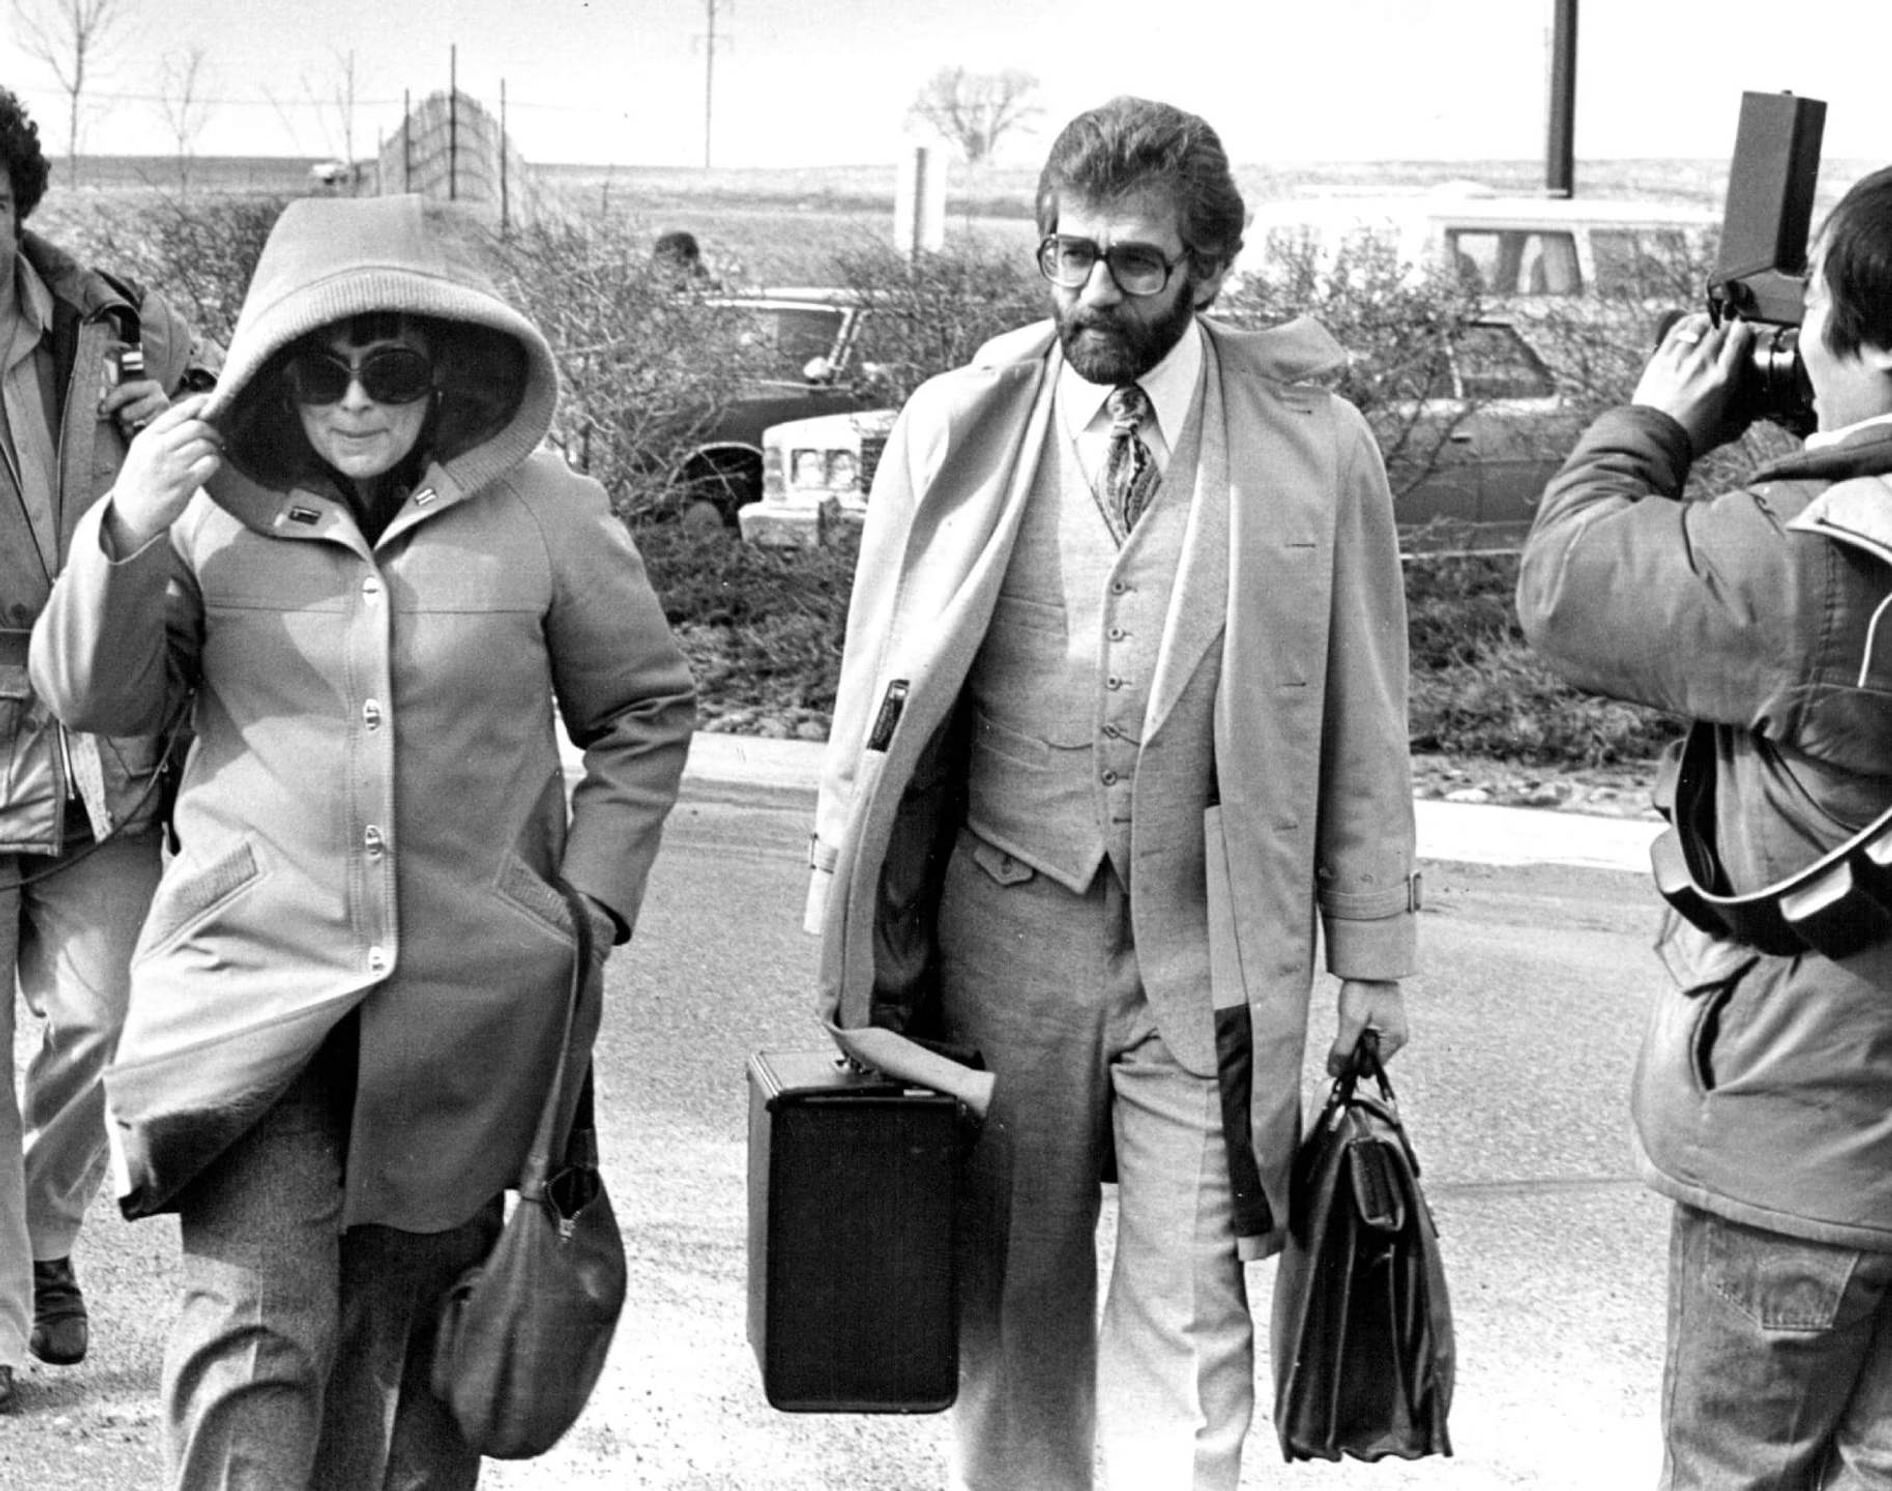 April 3, 1979 Marjorie Caldwell and her attorney, Ron Meshbesher, walked to the Dakota County Courthouse in Hastings. Photo credit: Art Hager, Minneapolis Star Tribune